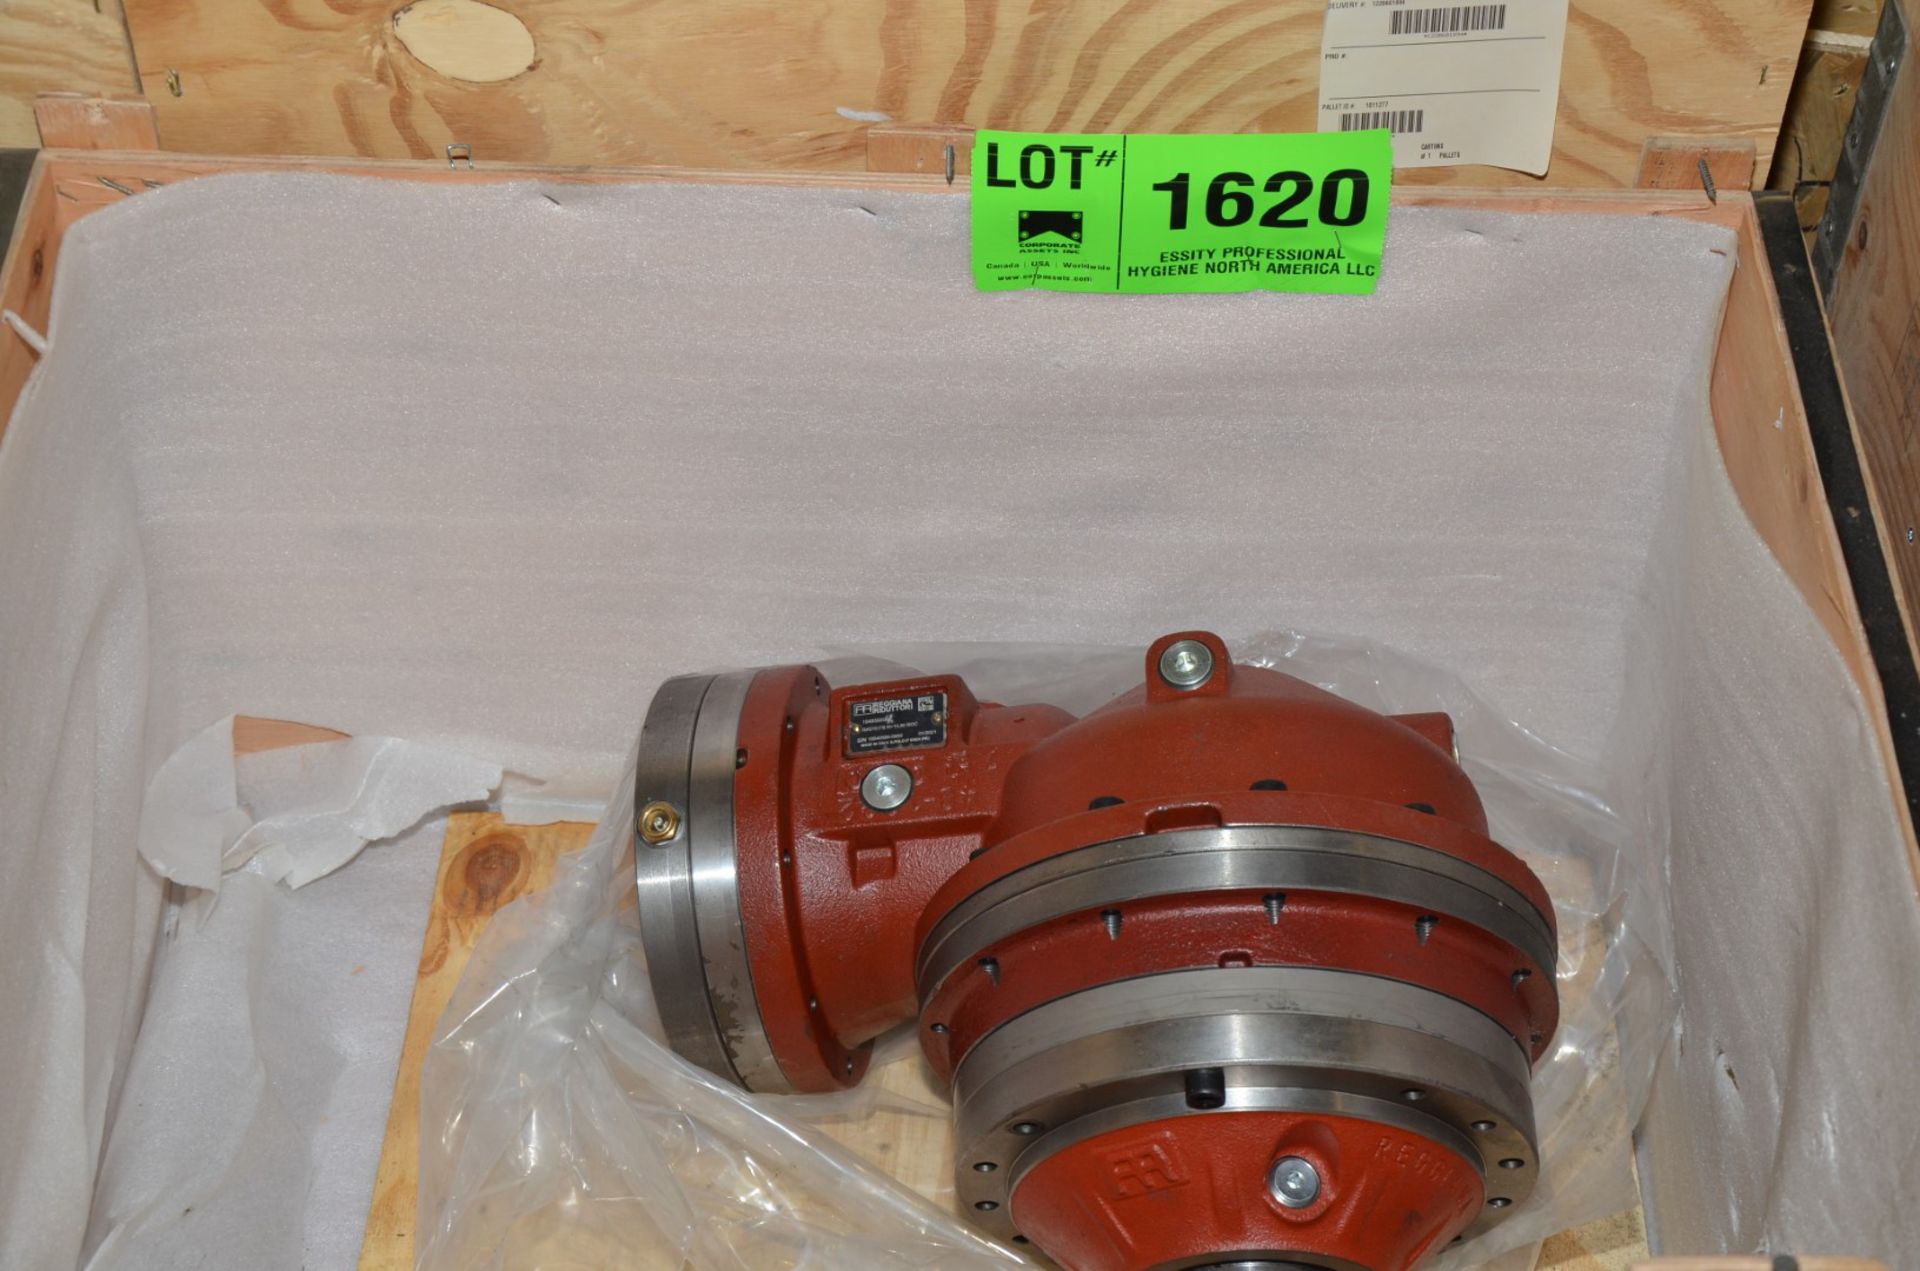 RBGGIANA PLANETARY GEARBOX [RIGGING FEE FOR LOT #1620 - $25 USD PLUS APPLICABLE TAXES]